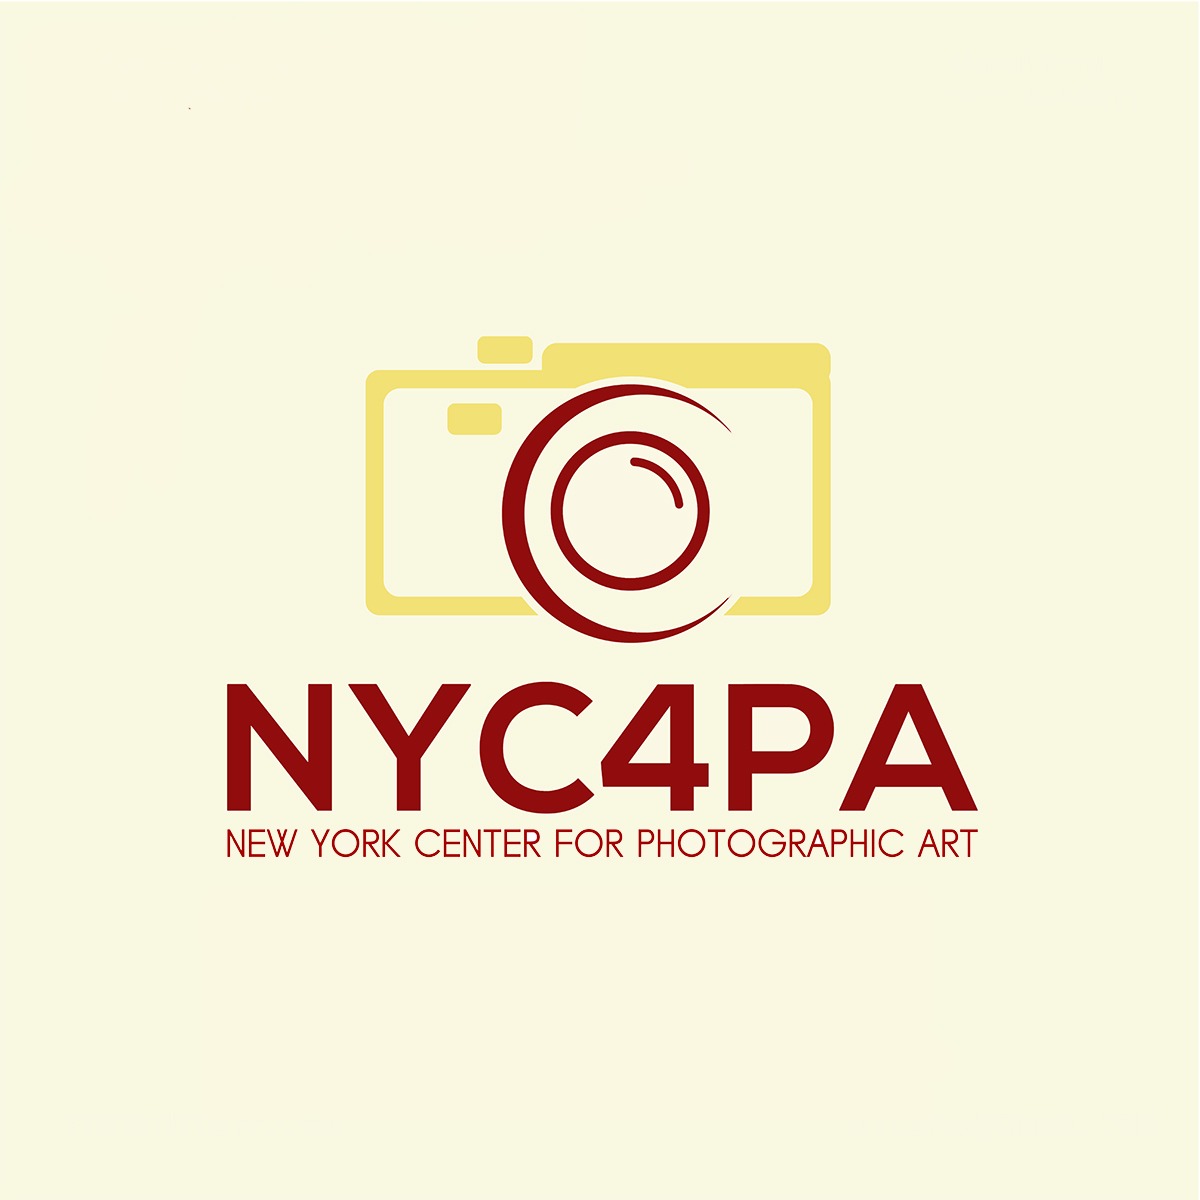 New York Center for Photographic Art - NYC4PA